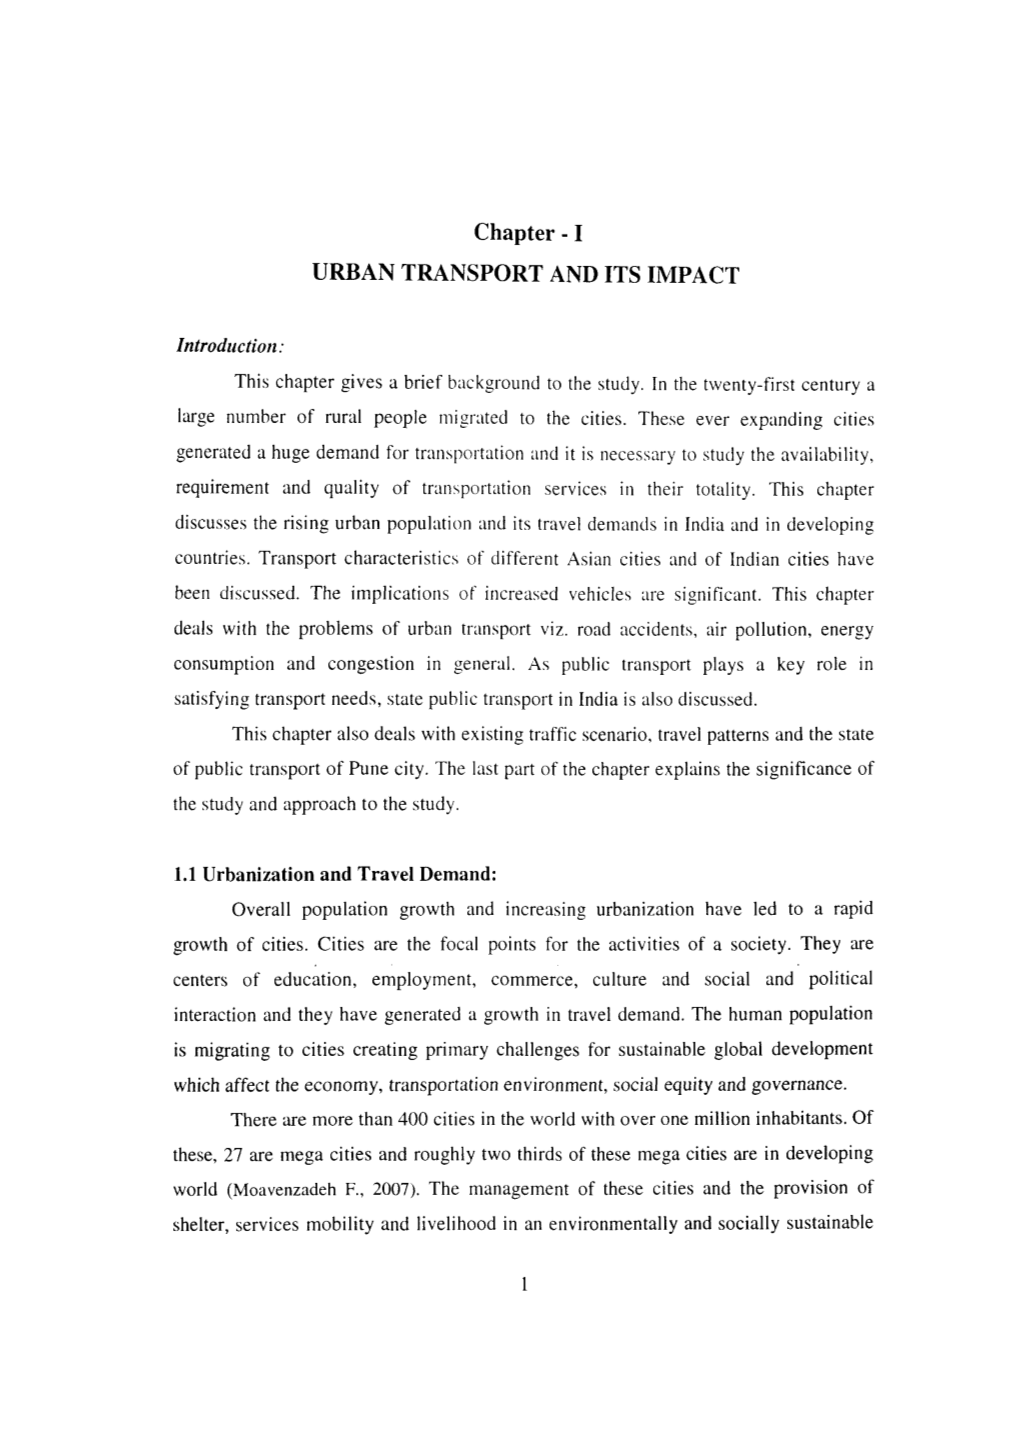 Chapter -1 URBAN TRANSPORT and ITS IMPACT